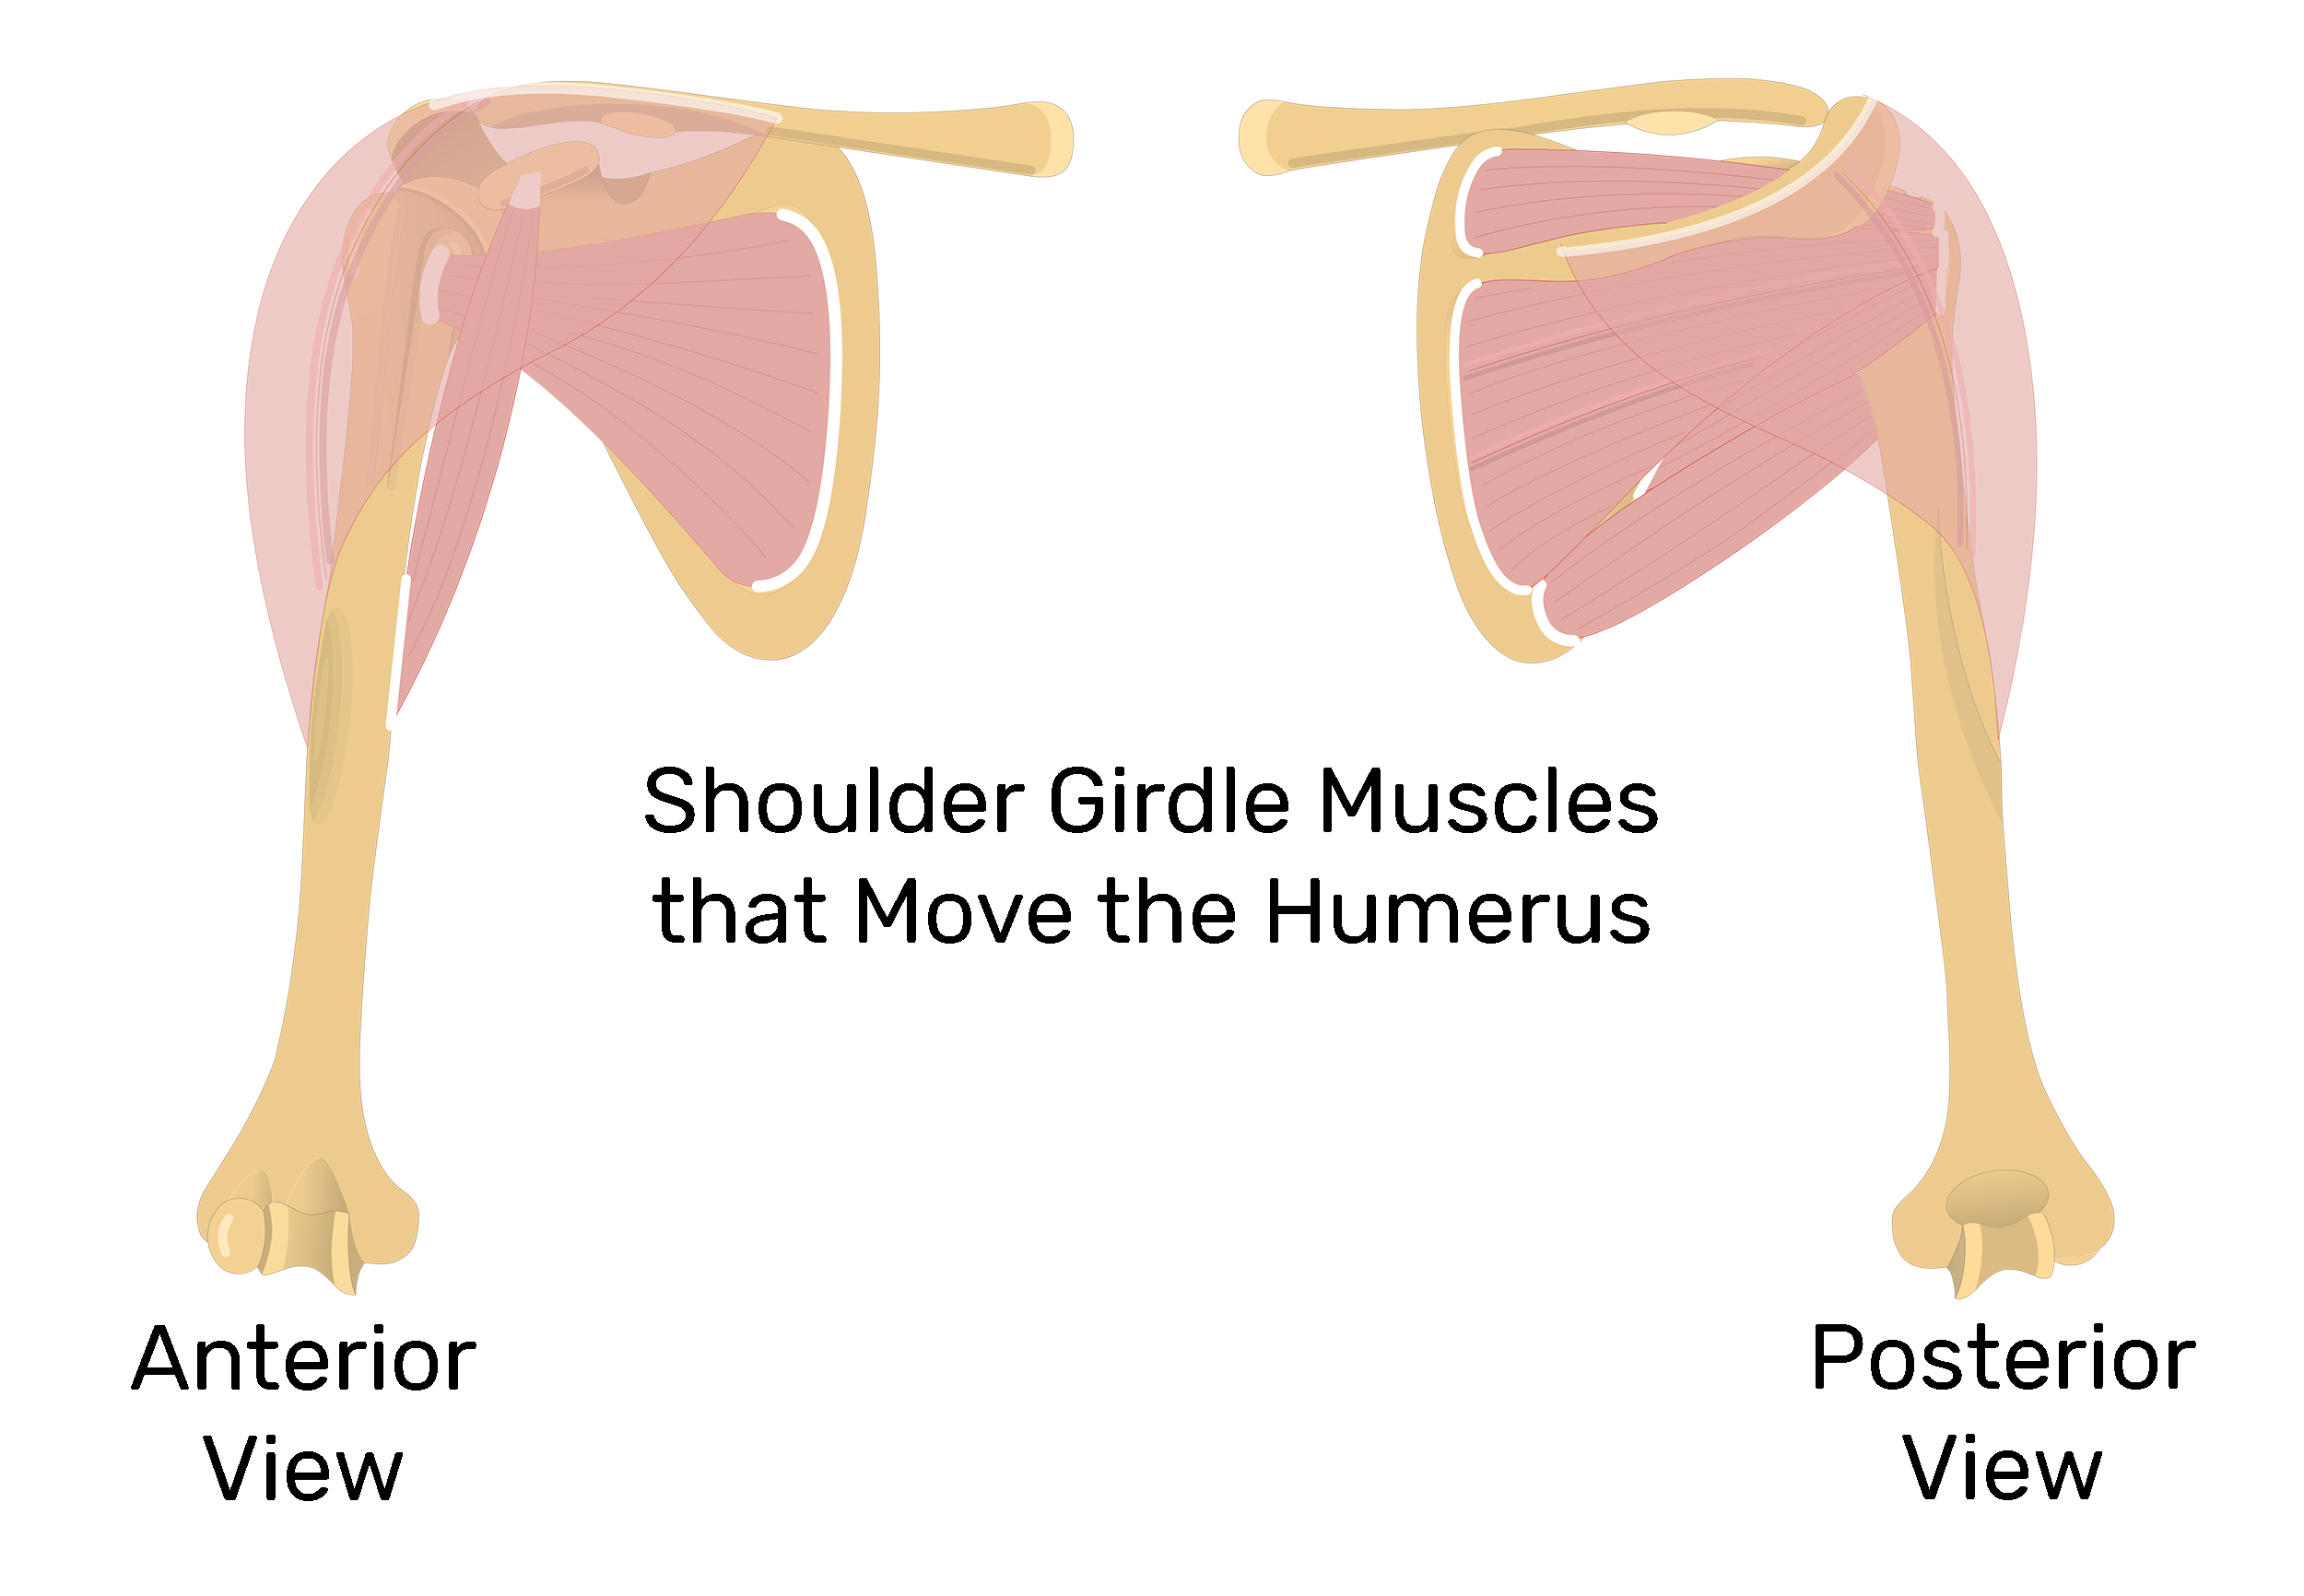 Muscles of the shoulder girdle